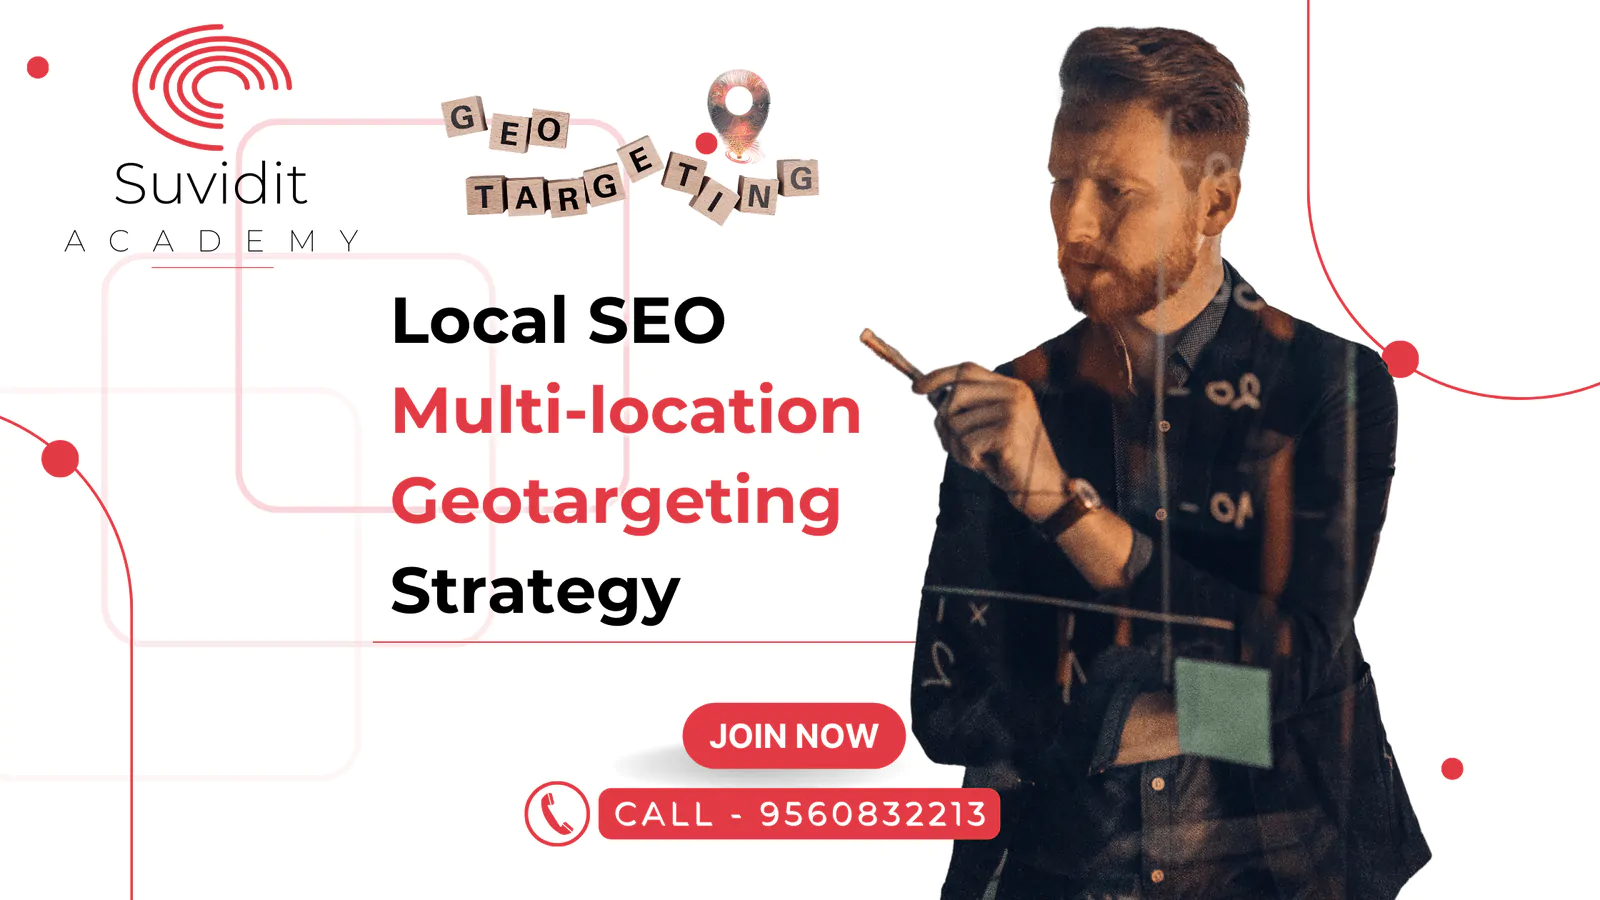 Local SEO Multi-location Geotargeting Strategy